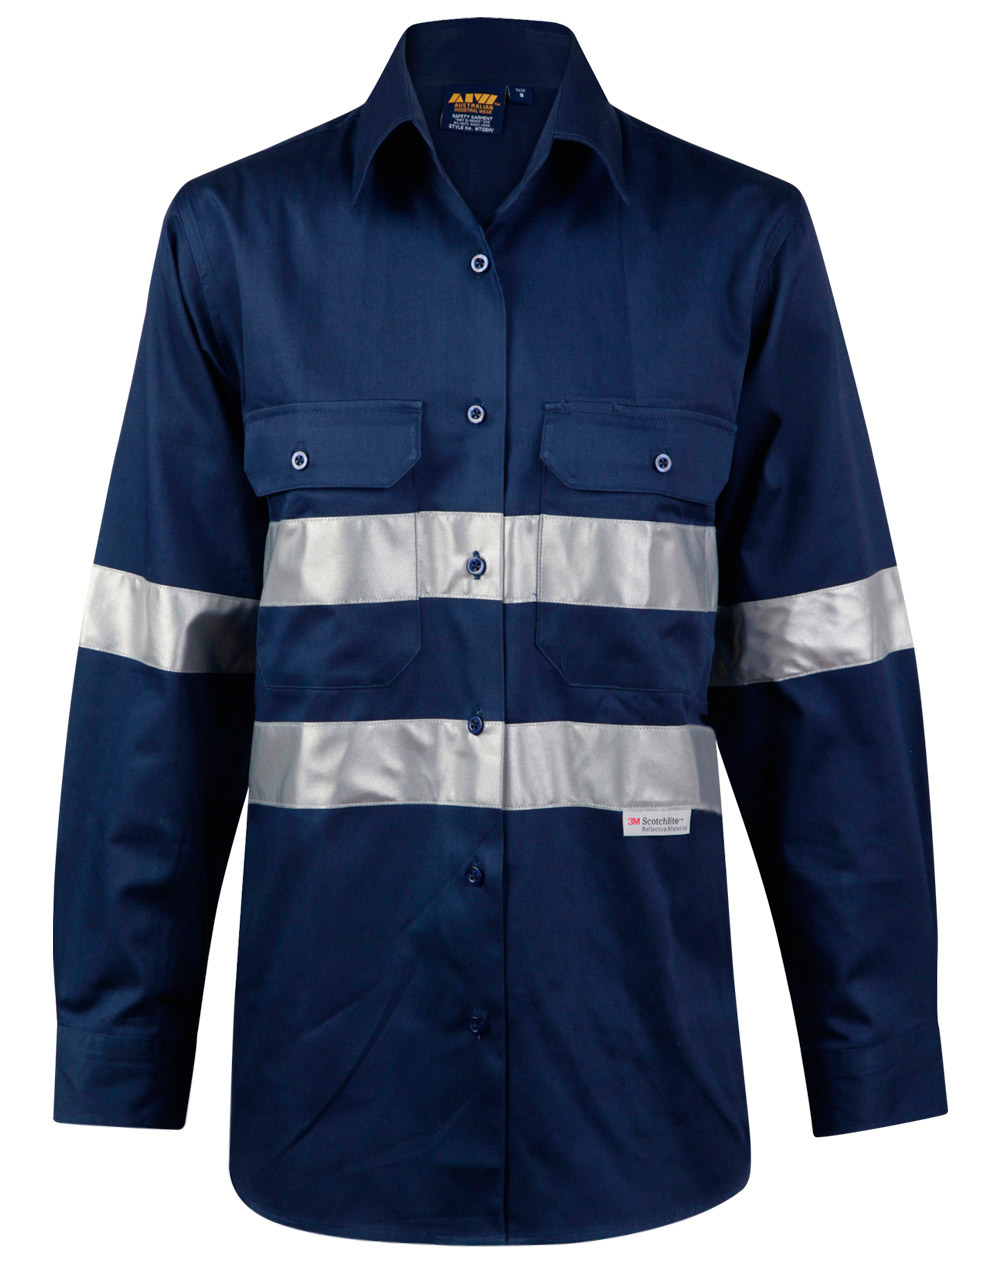 WOMEN'S COTTON DRILL WORK SHIRT WITH 3M TAPES - WT08HV - Australian ...